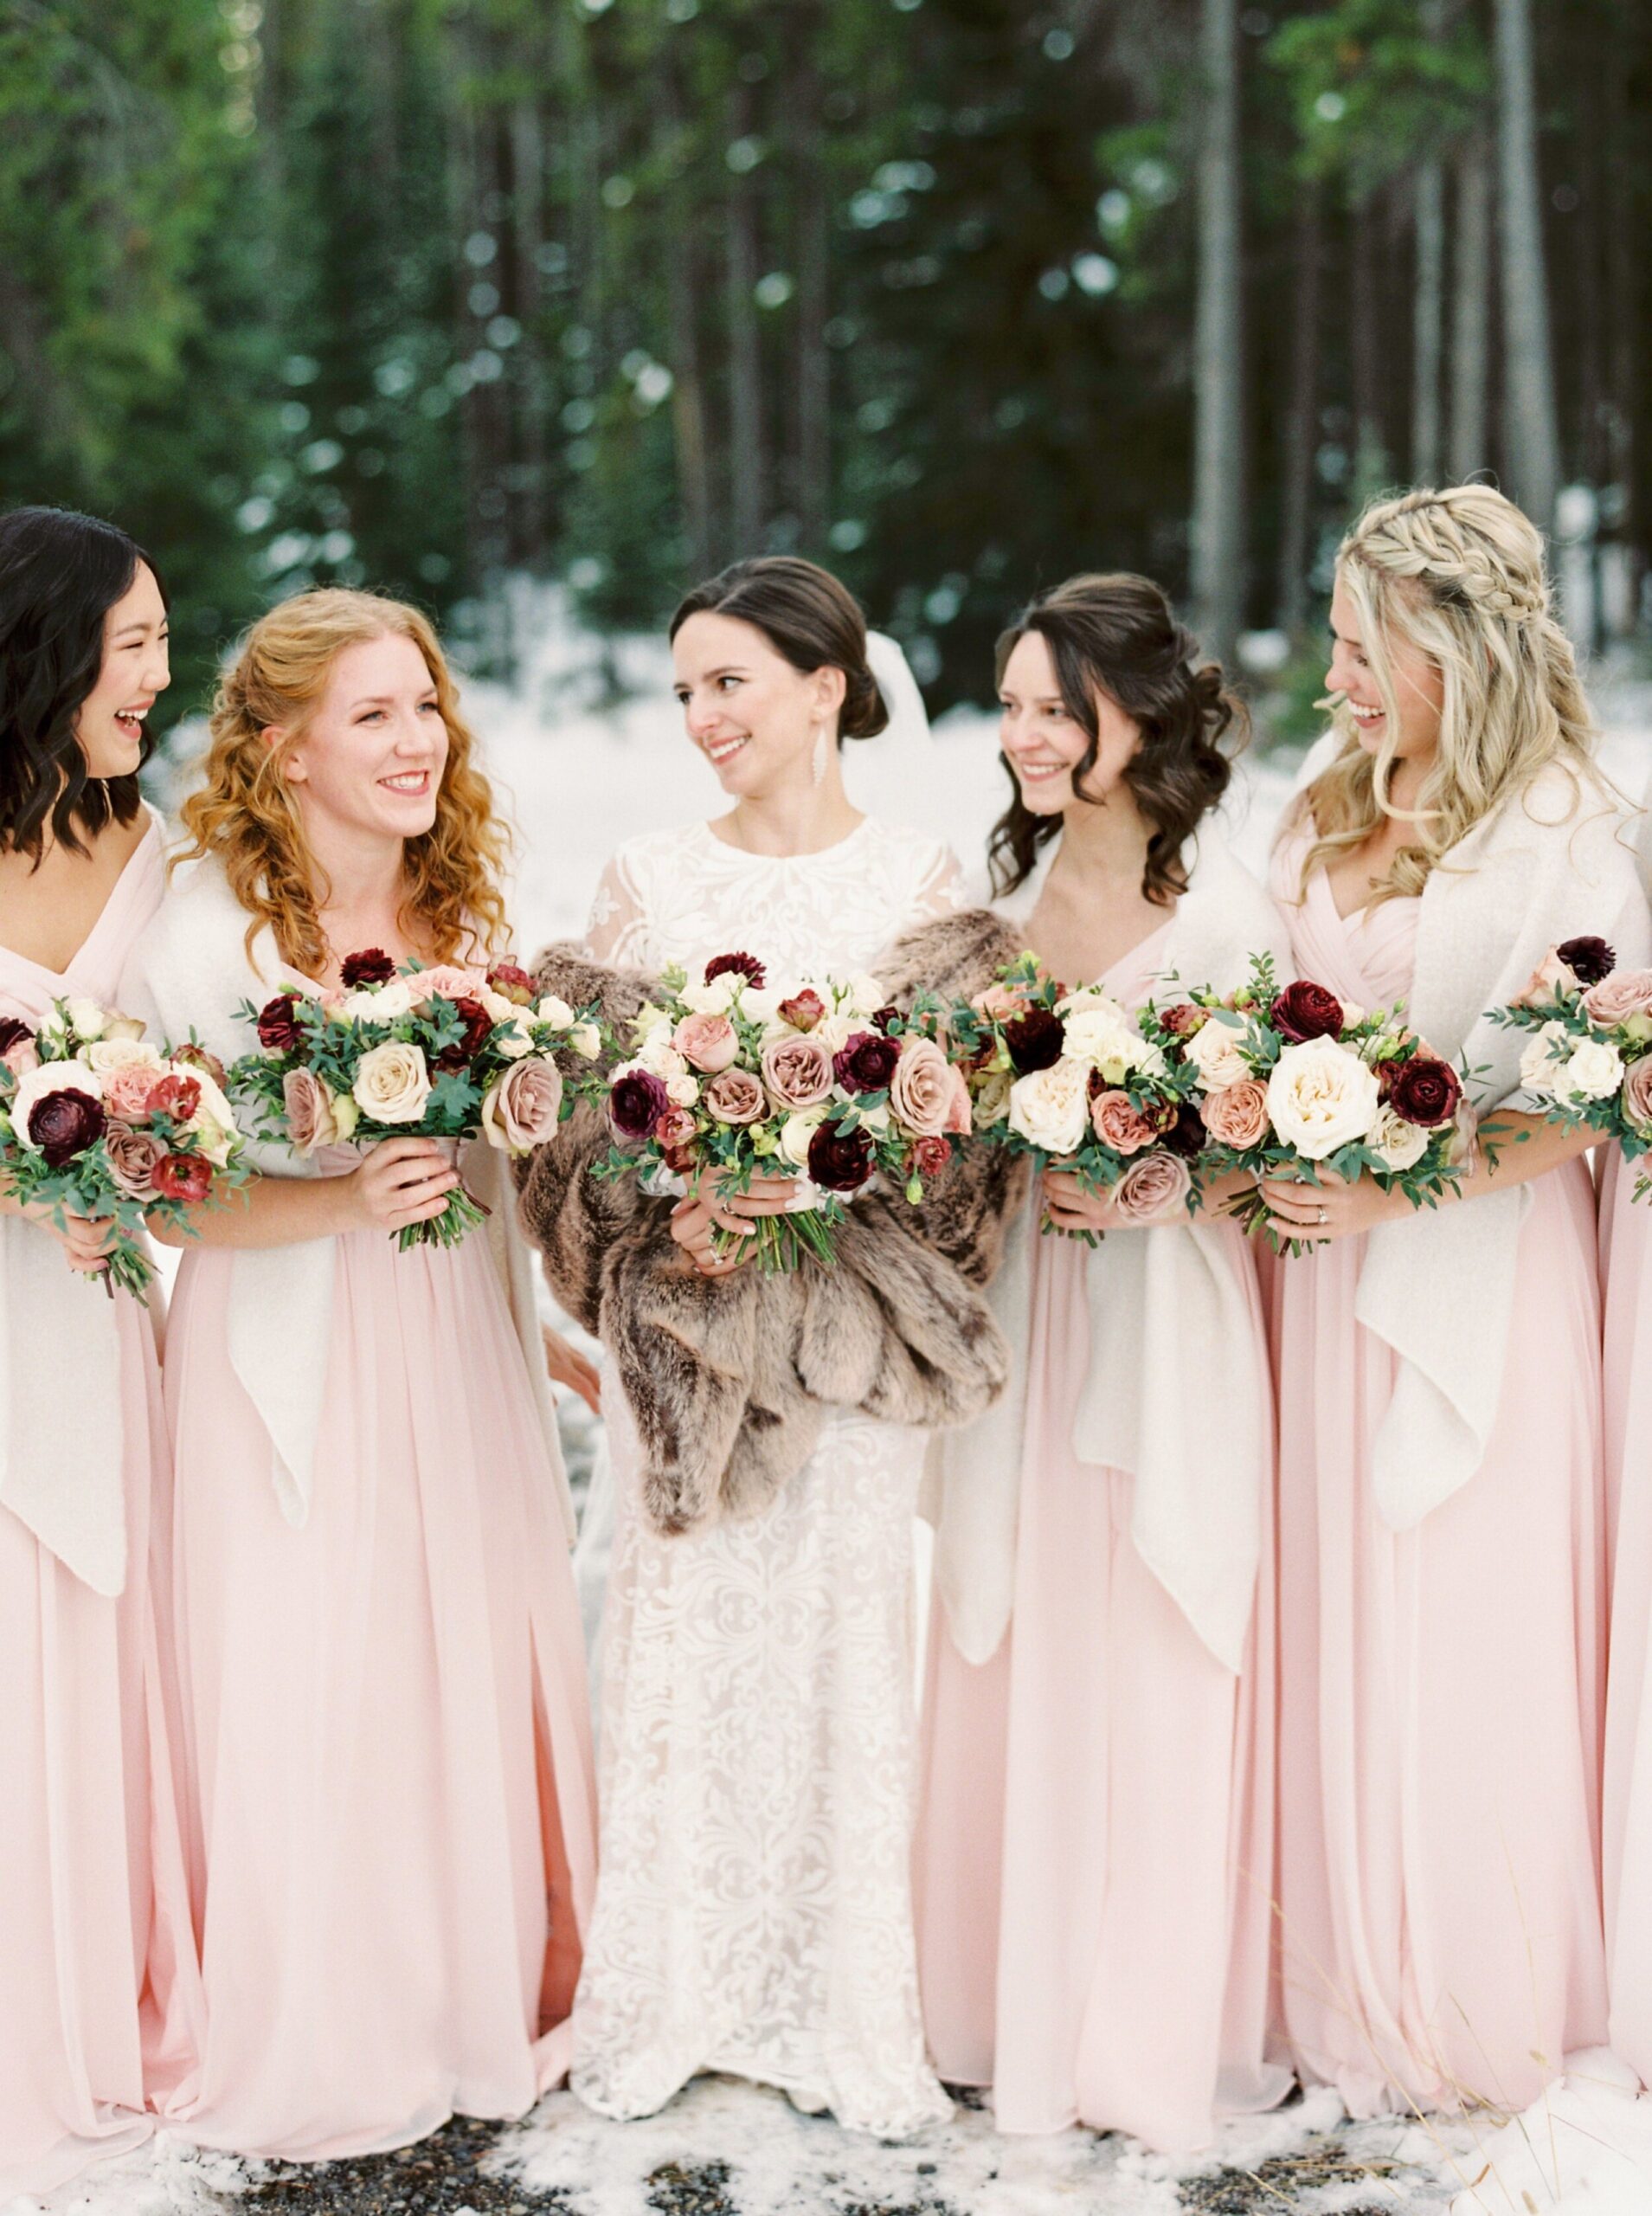  Blush winter bridesmaids outfits with fur stolls and modern pops of color bridal bouquet 